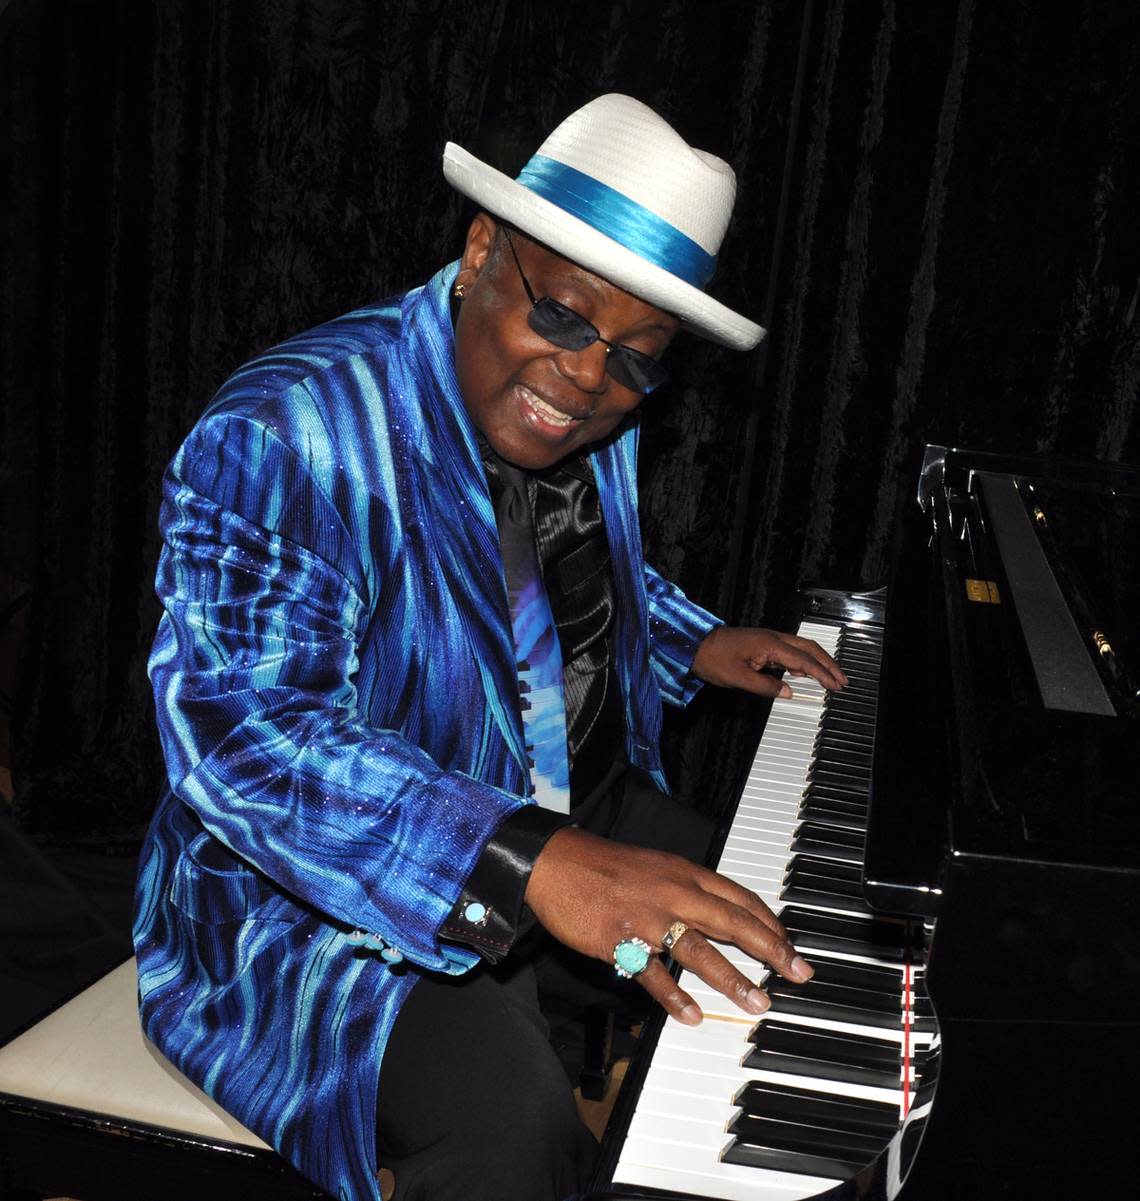 Kenny Wayne, aka the Blues Boss, plays the piano in an electric blue ensemble.